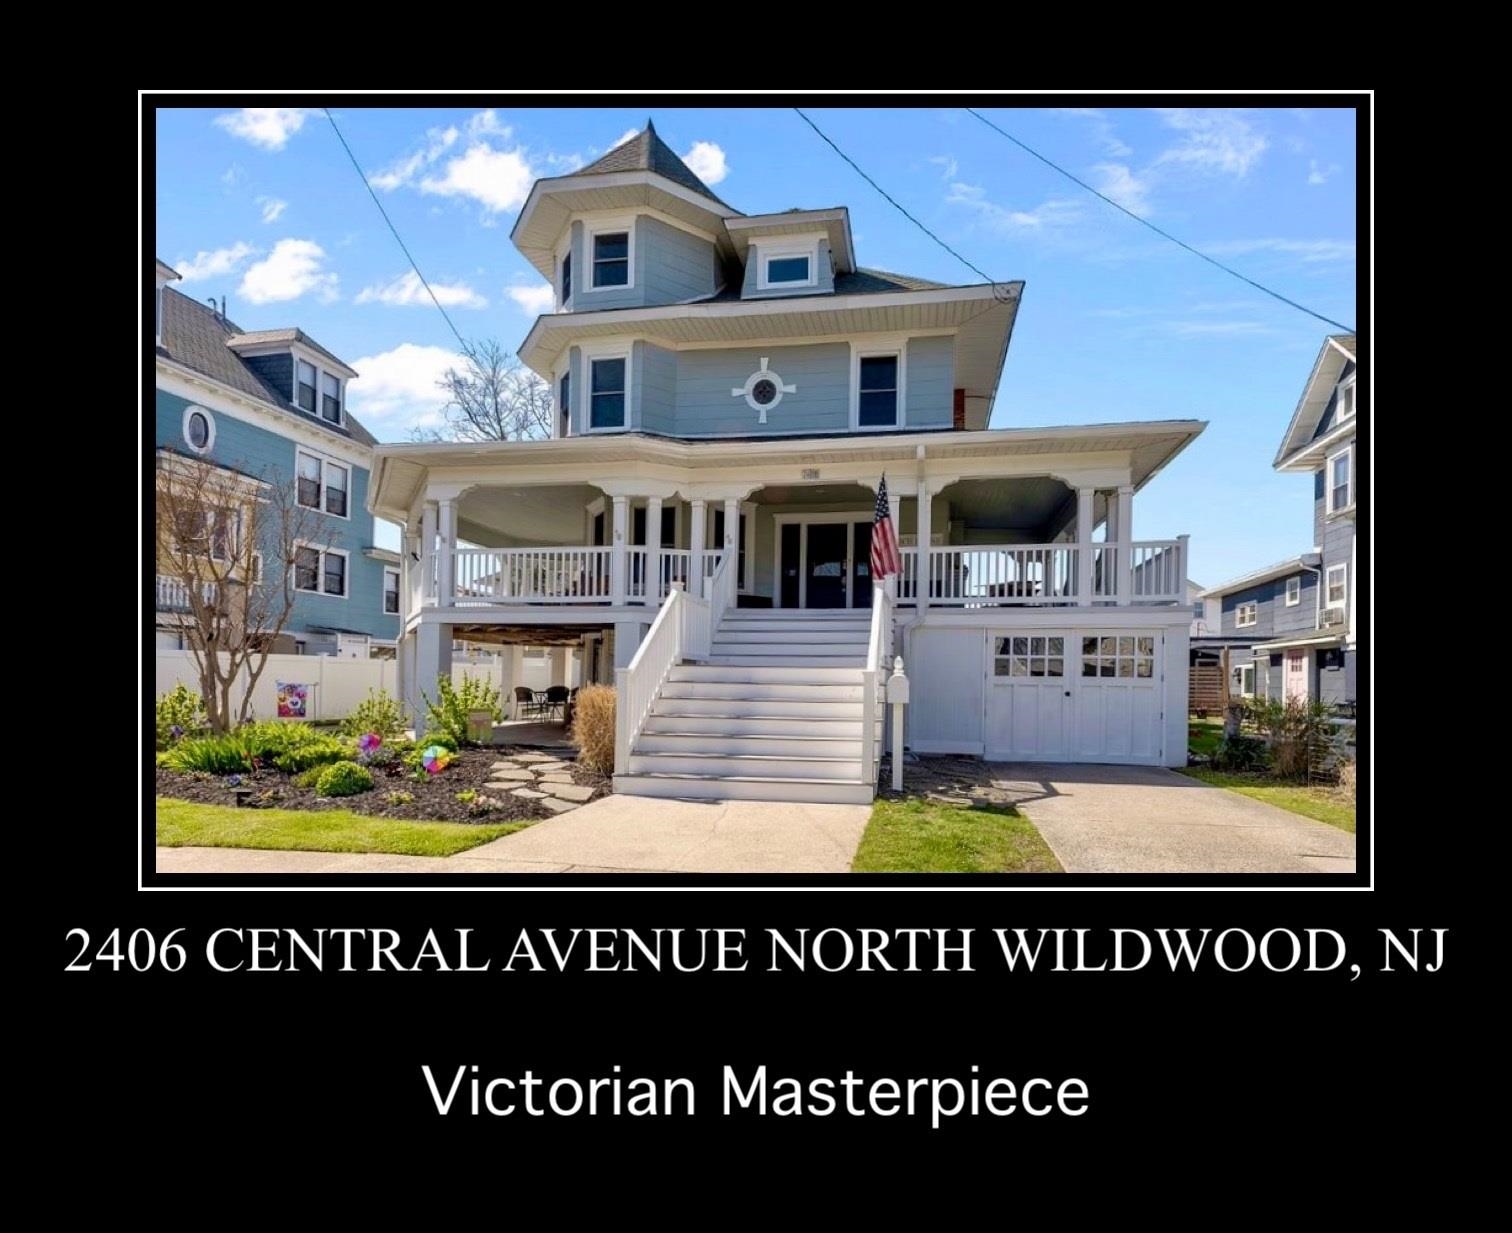 2406 Central Avenue - North Wildwood